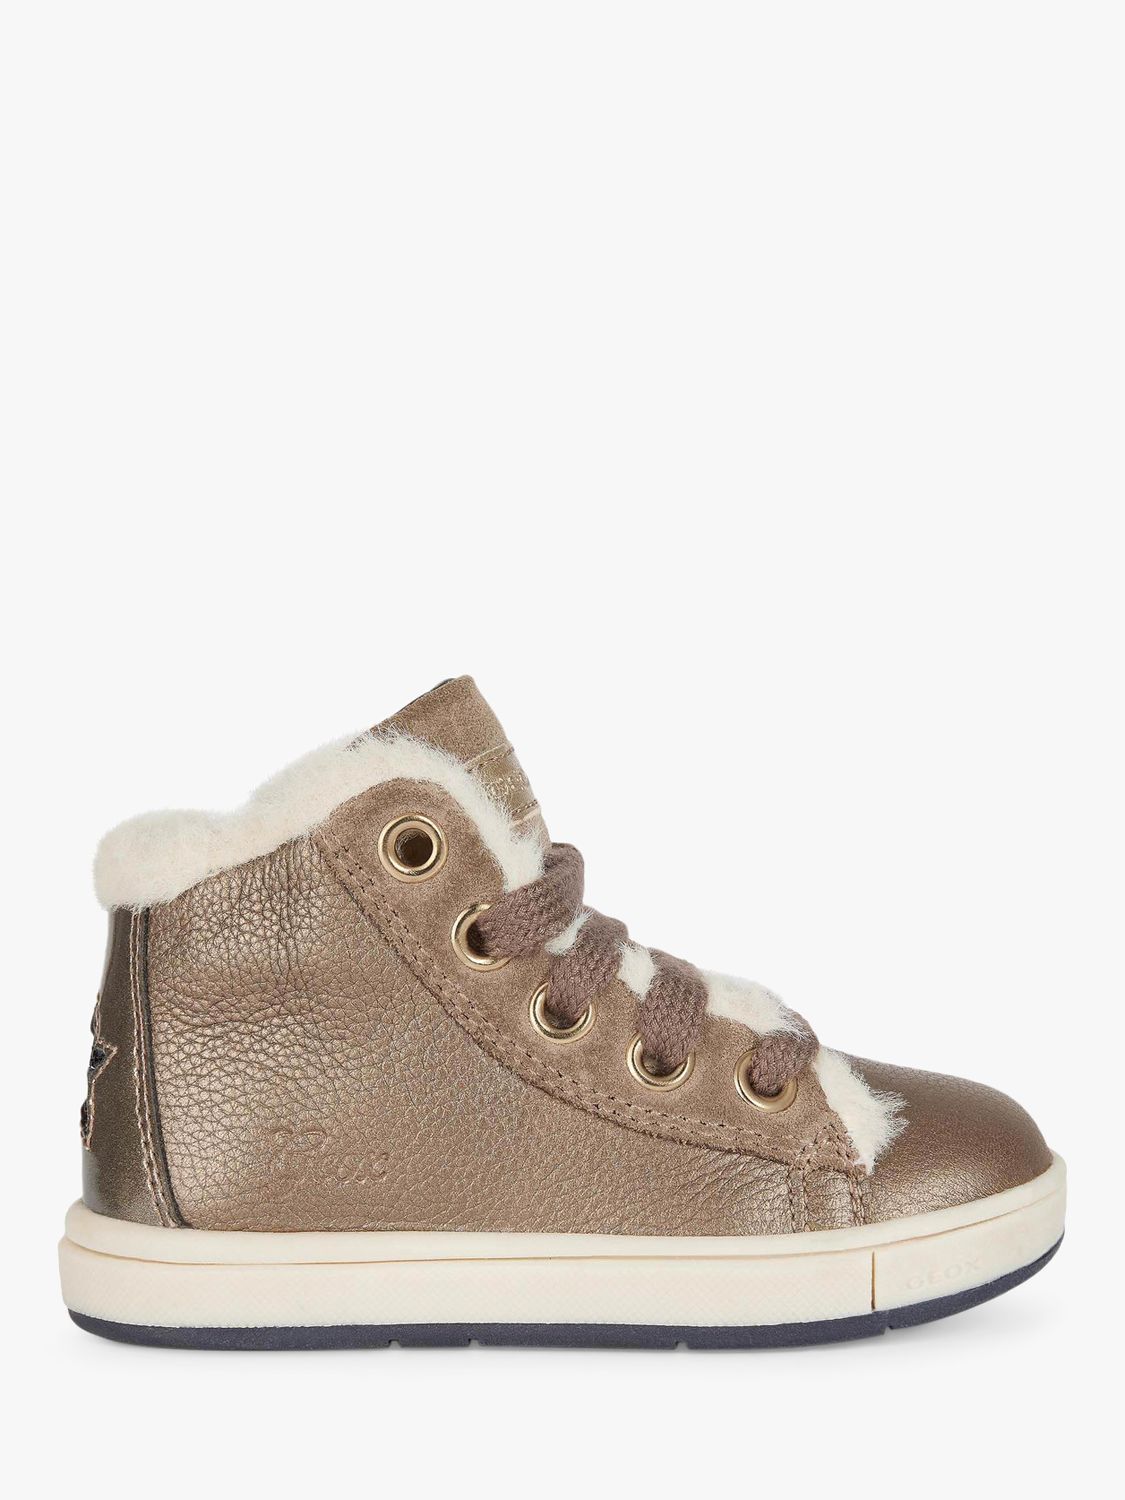 Kids' Trottola High Top Leather Trainers, Smoke White at Lewis & Partners